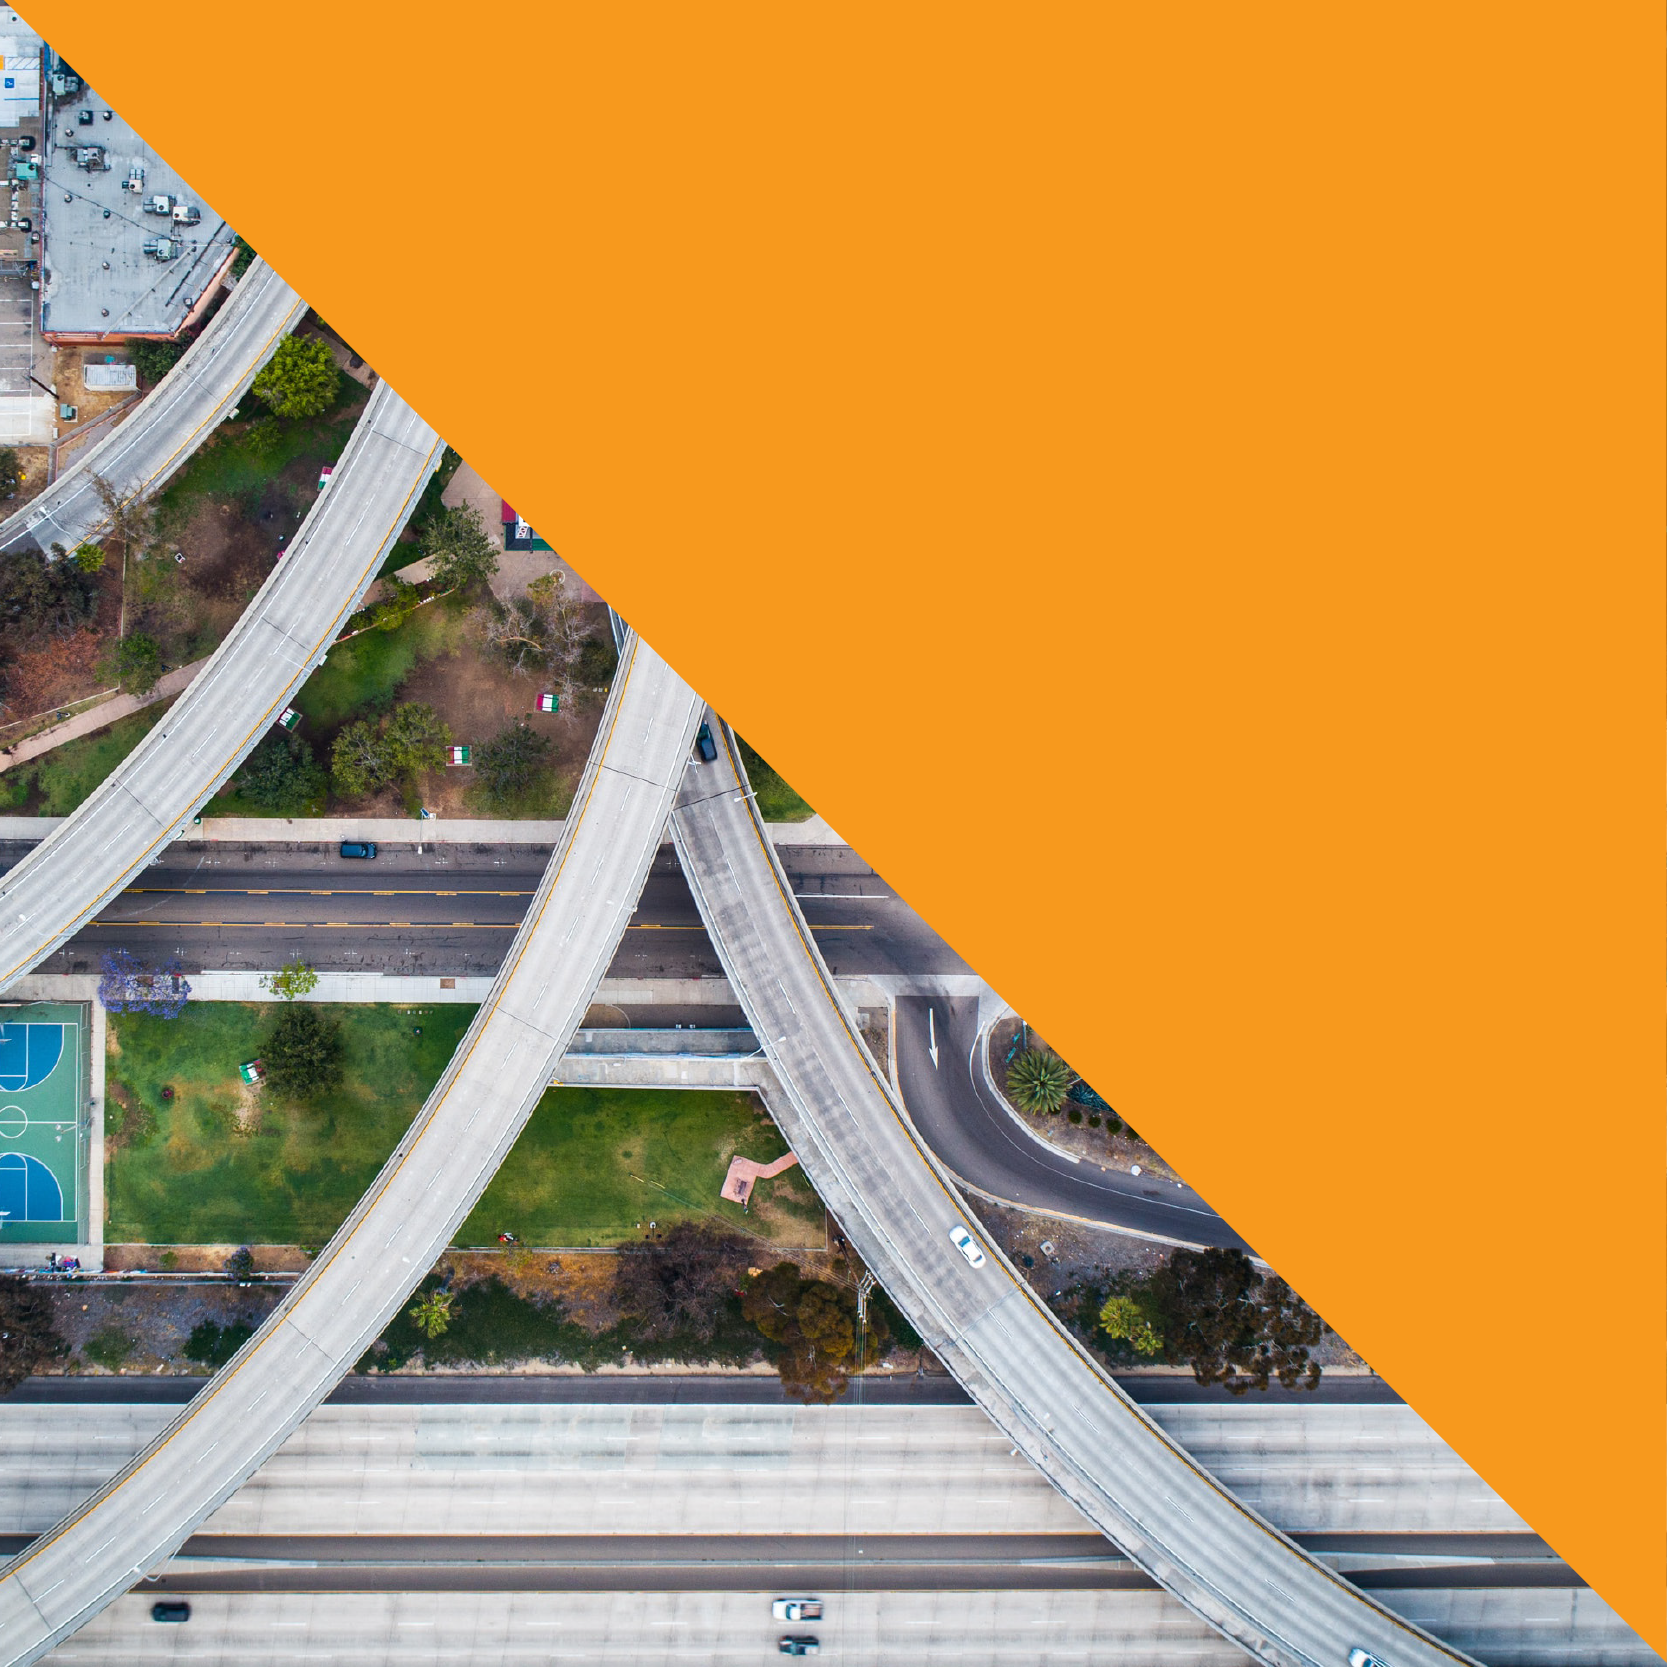 Aerial view of a busy highway system with roads overlapping and an orange right angle triangle overlayed for stylistic impact